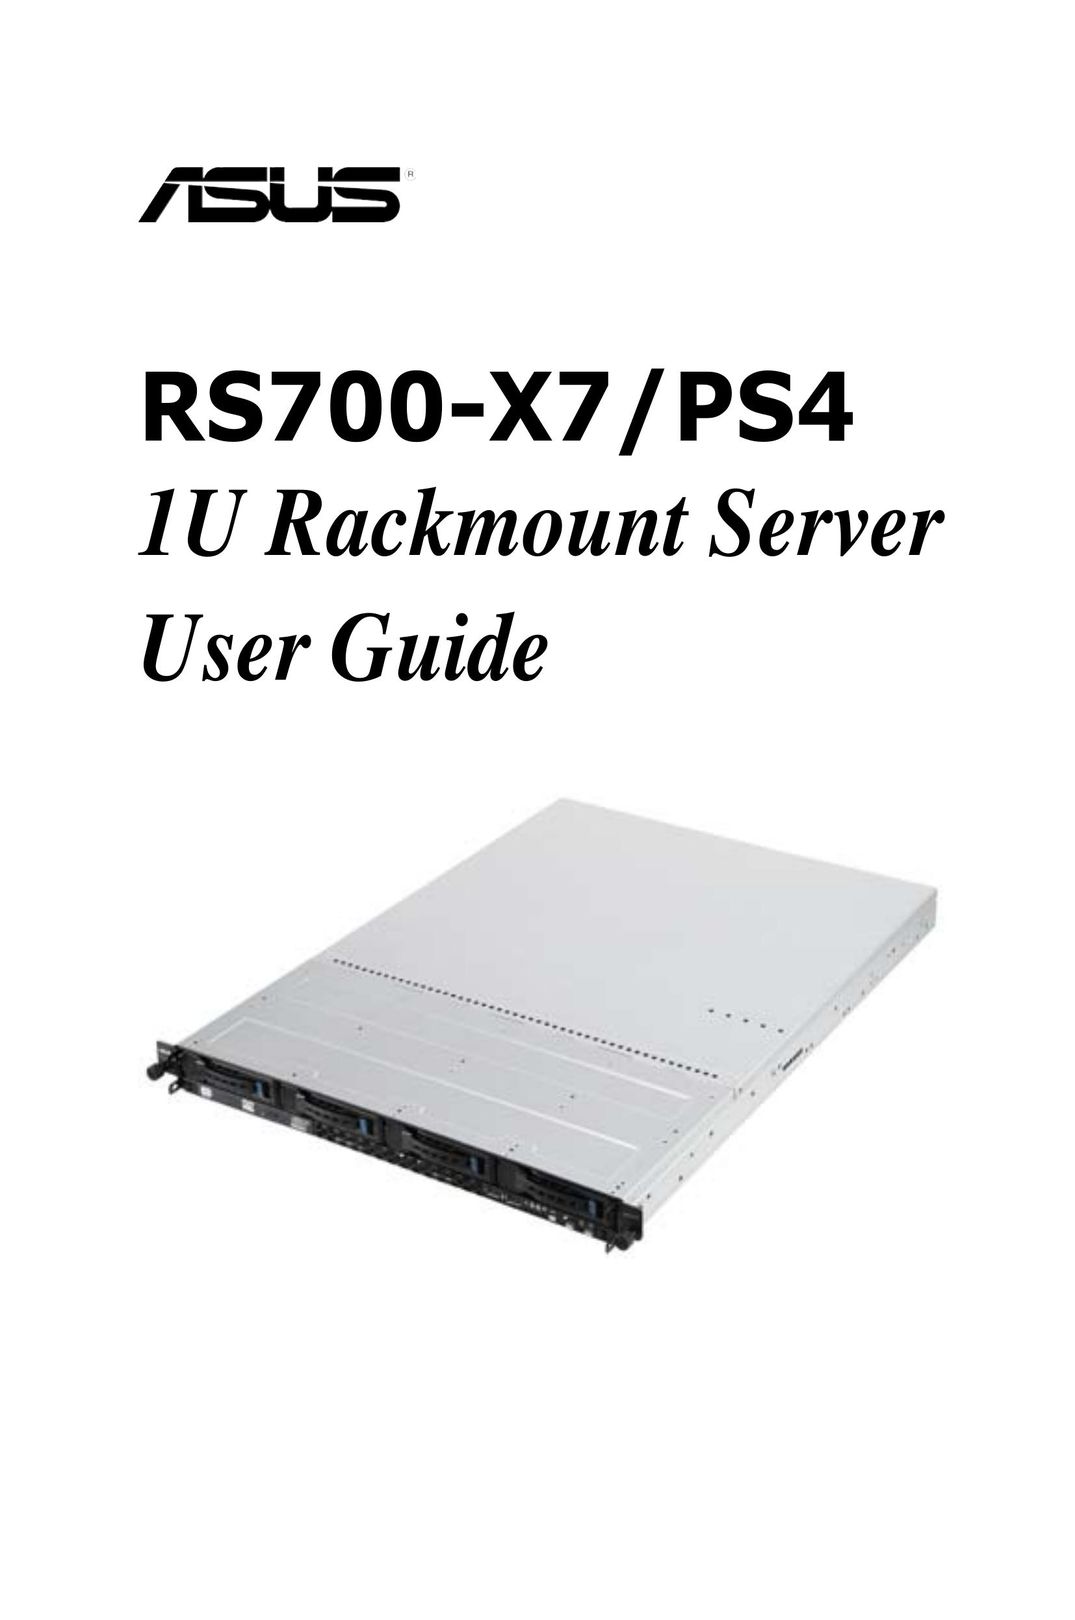 Asus RS700X7PS4 Network Hardware User Manual